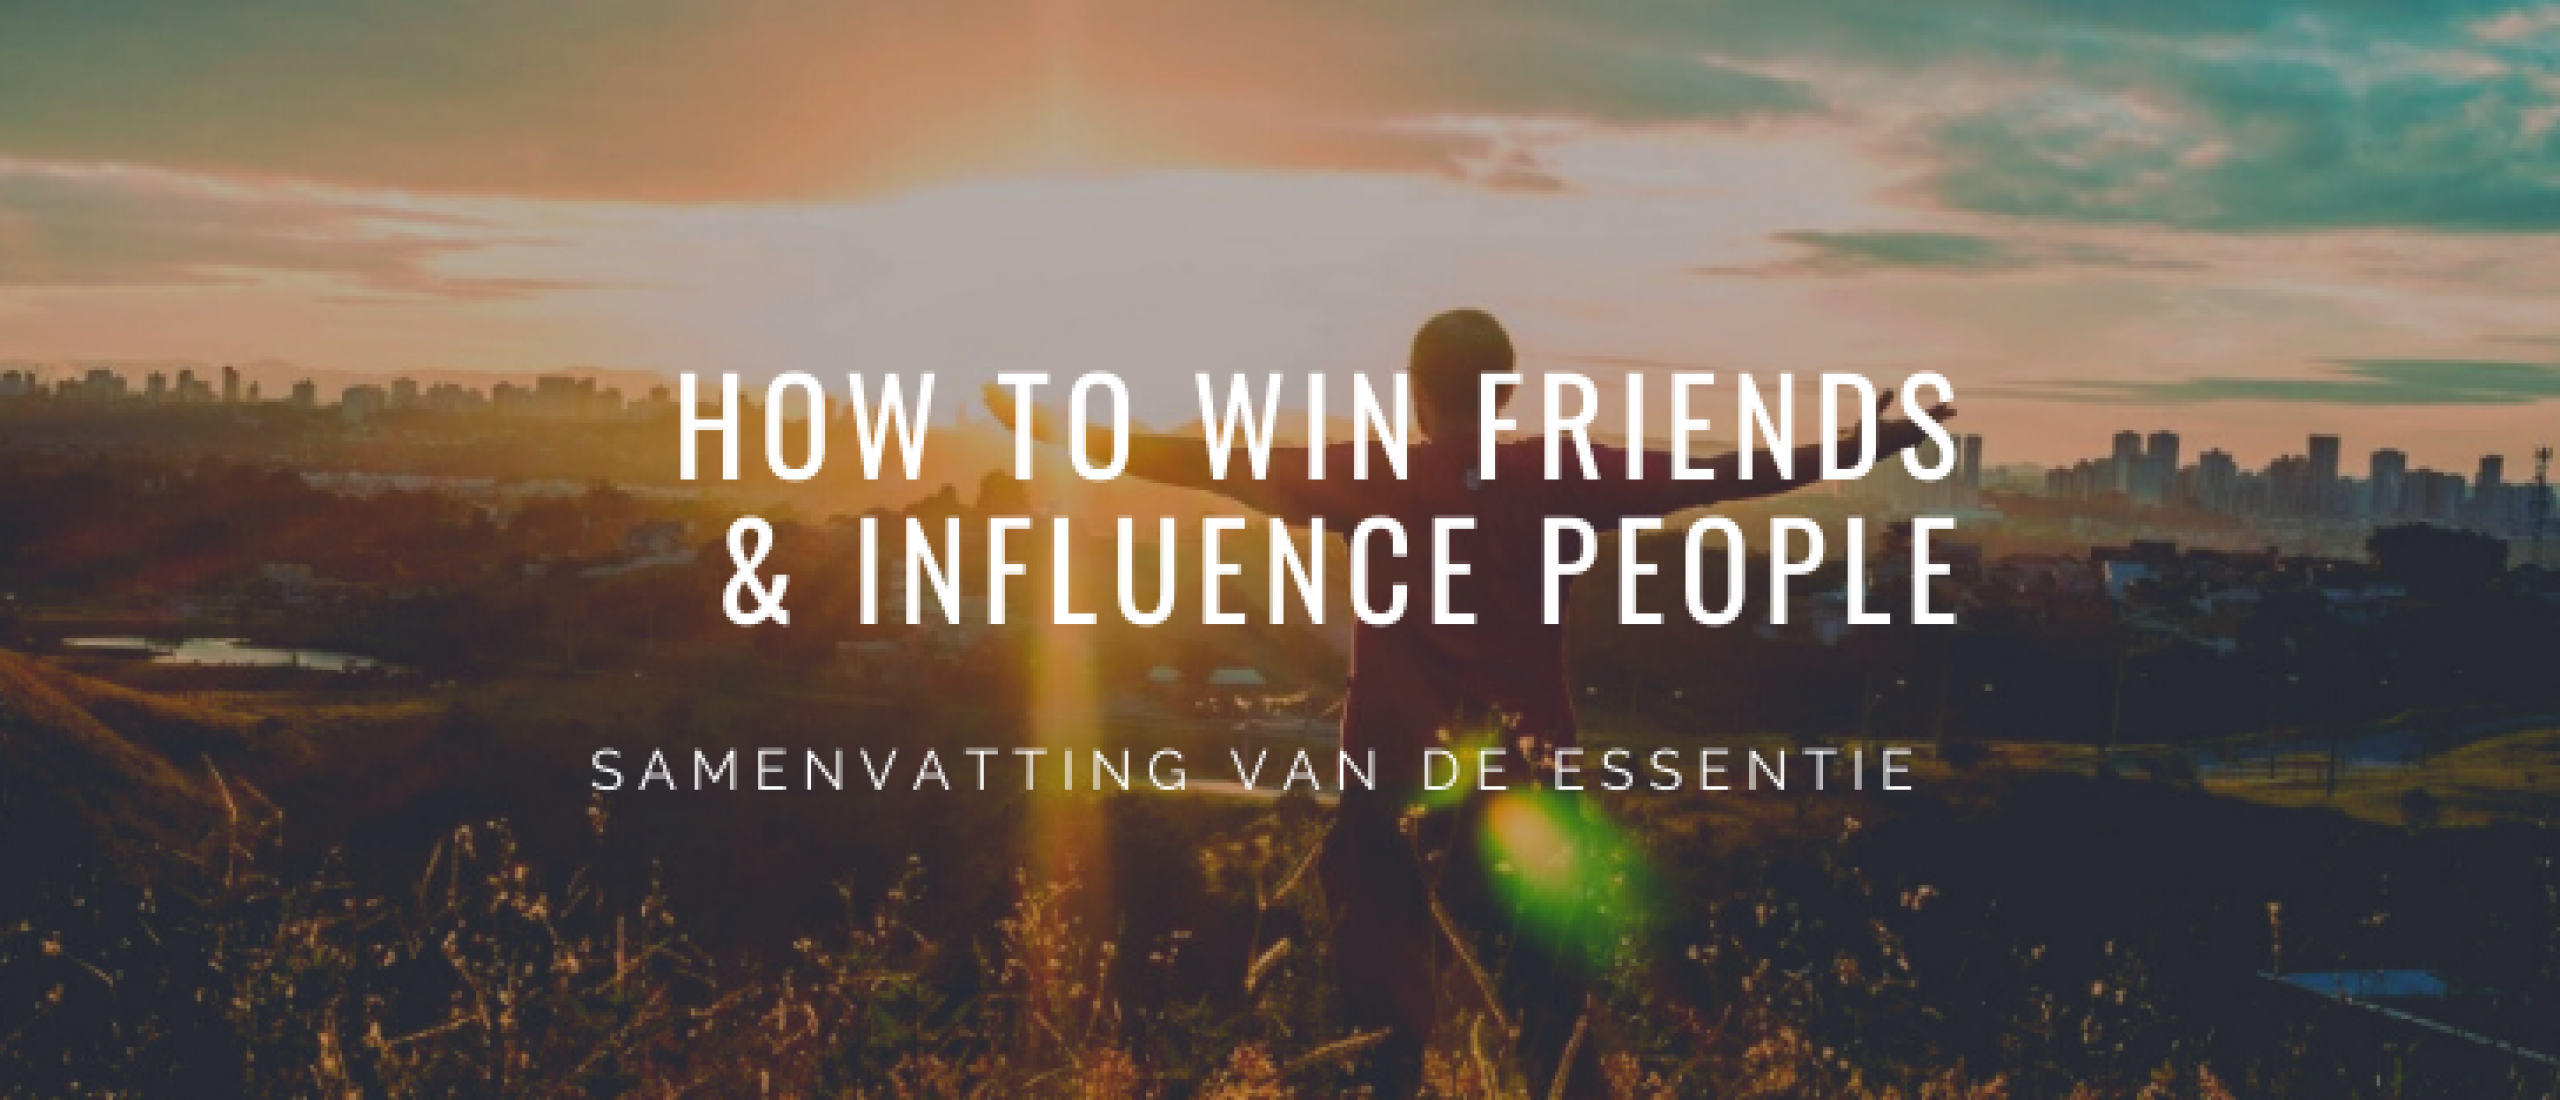 samenvatting-how-to-win-friends-and-influence-people